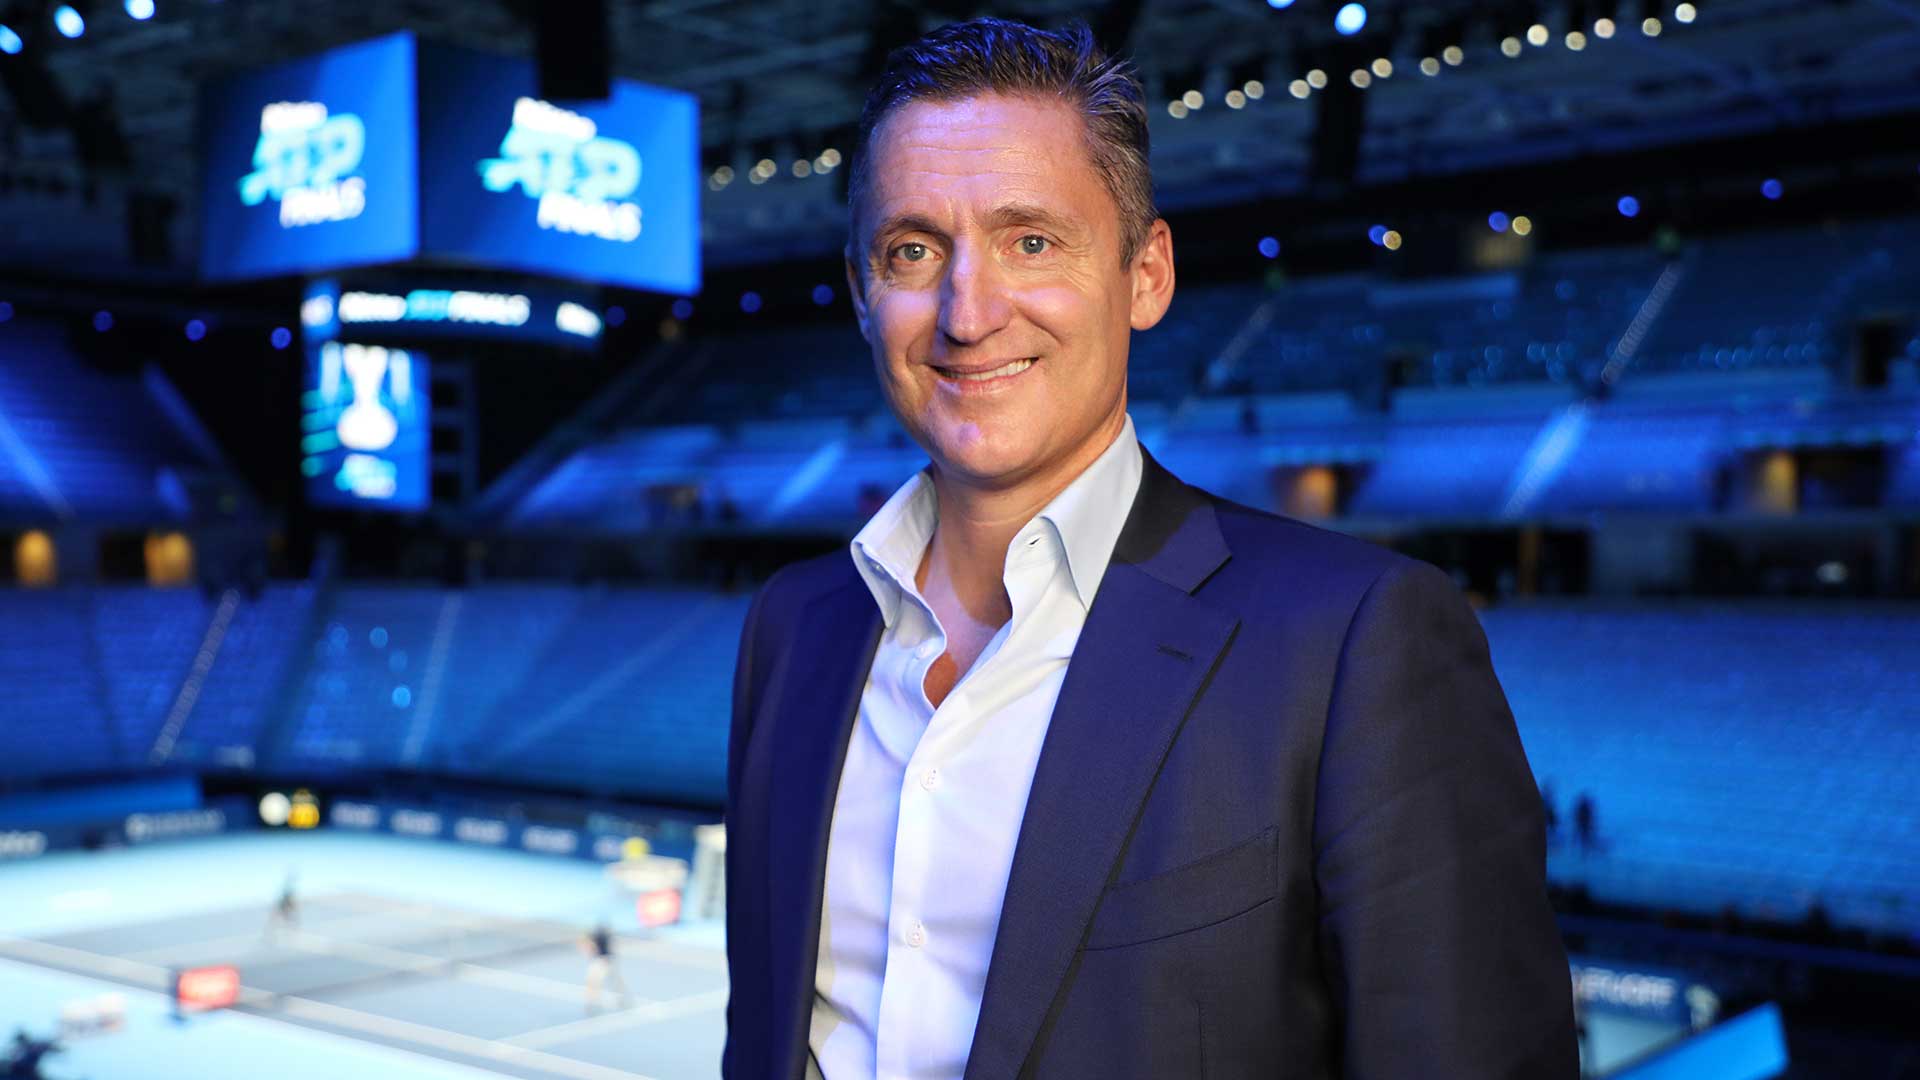 Andrea Gaudenzi has been has been re-elected as the Chairman of the ATP.